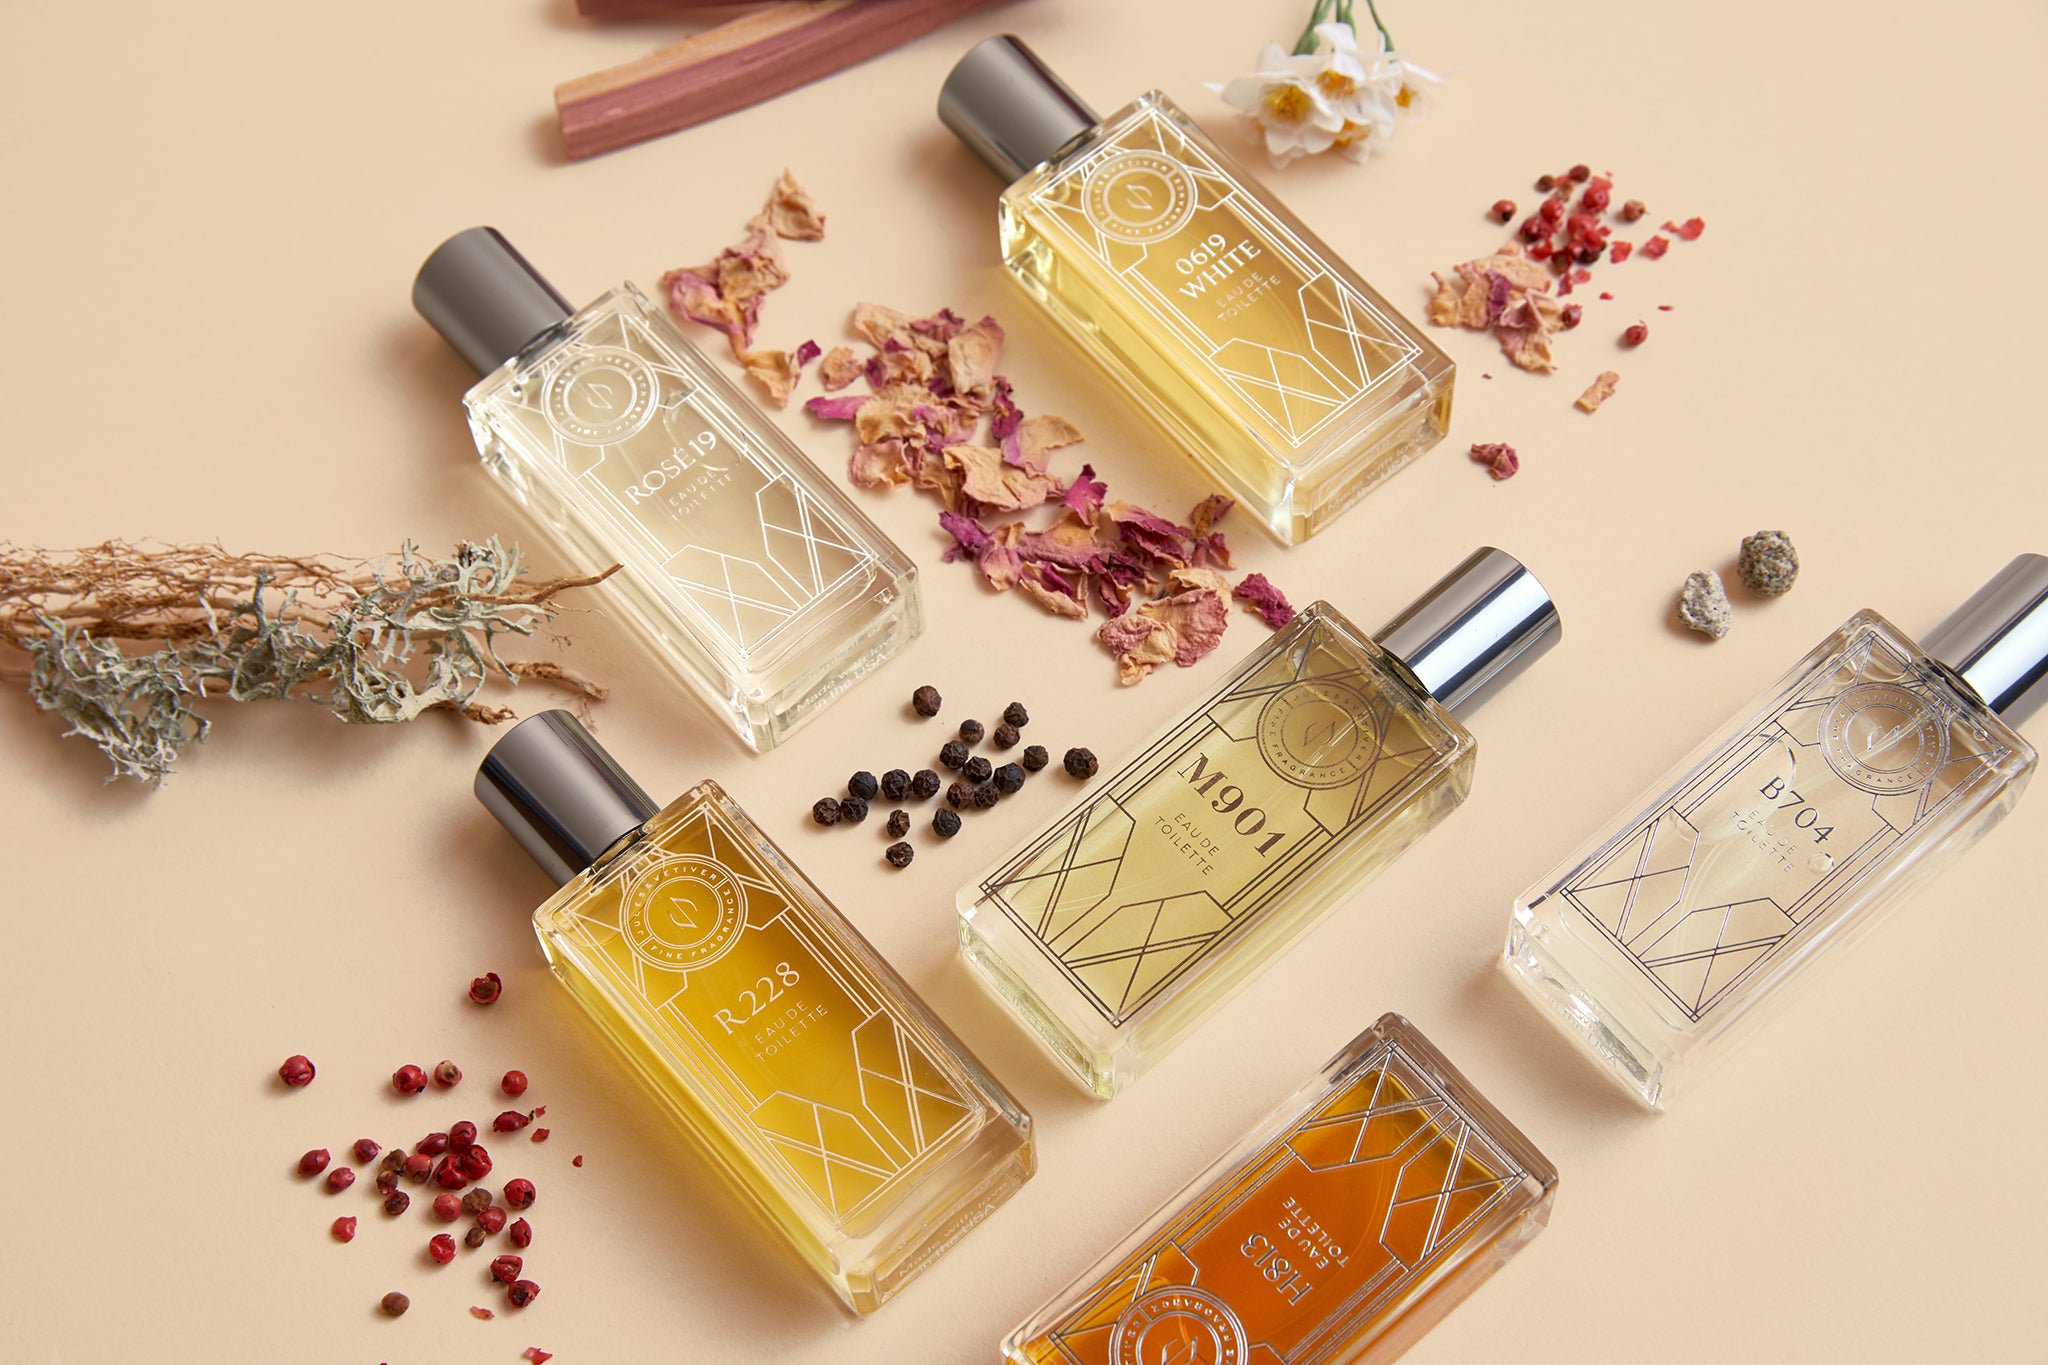 How to Know Which Perfume Works with your Body Chemistry